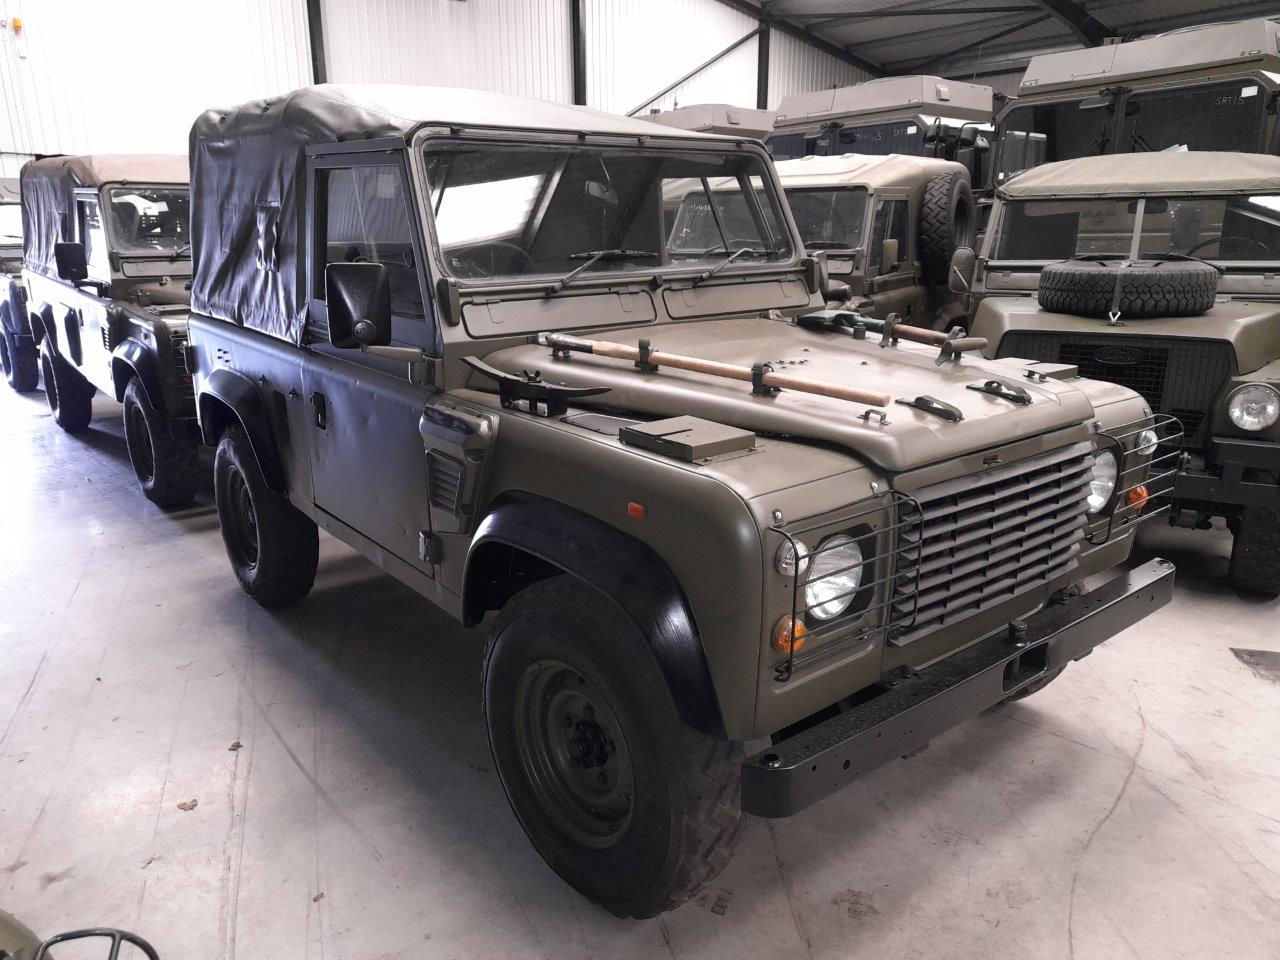 Land Rover Defender 90 Wolf  RHD Soft Top (Remus) - Govsales of mod surplus ex army trucks, ex army land rovers and other military vehicles for sale